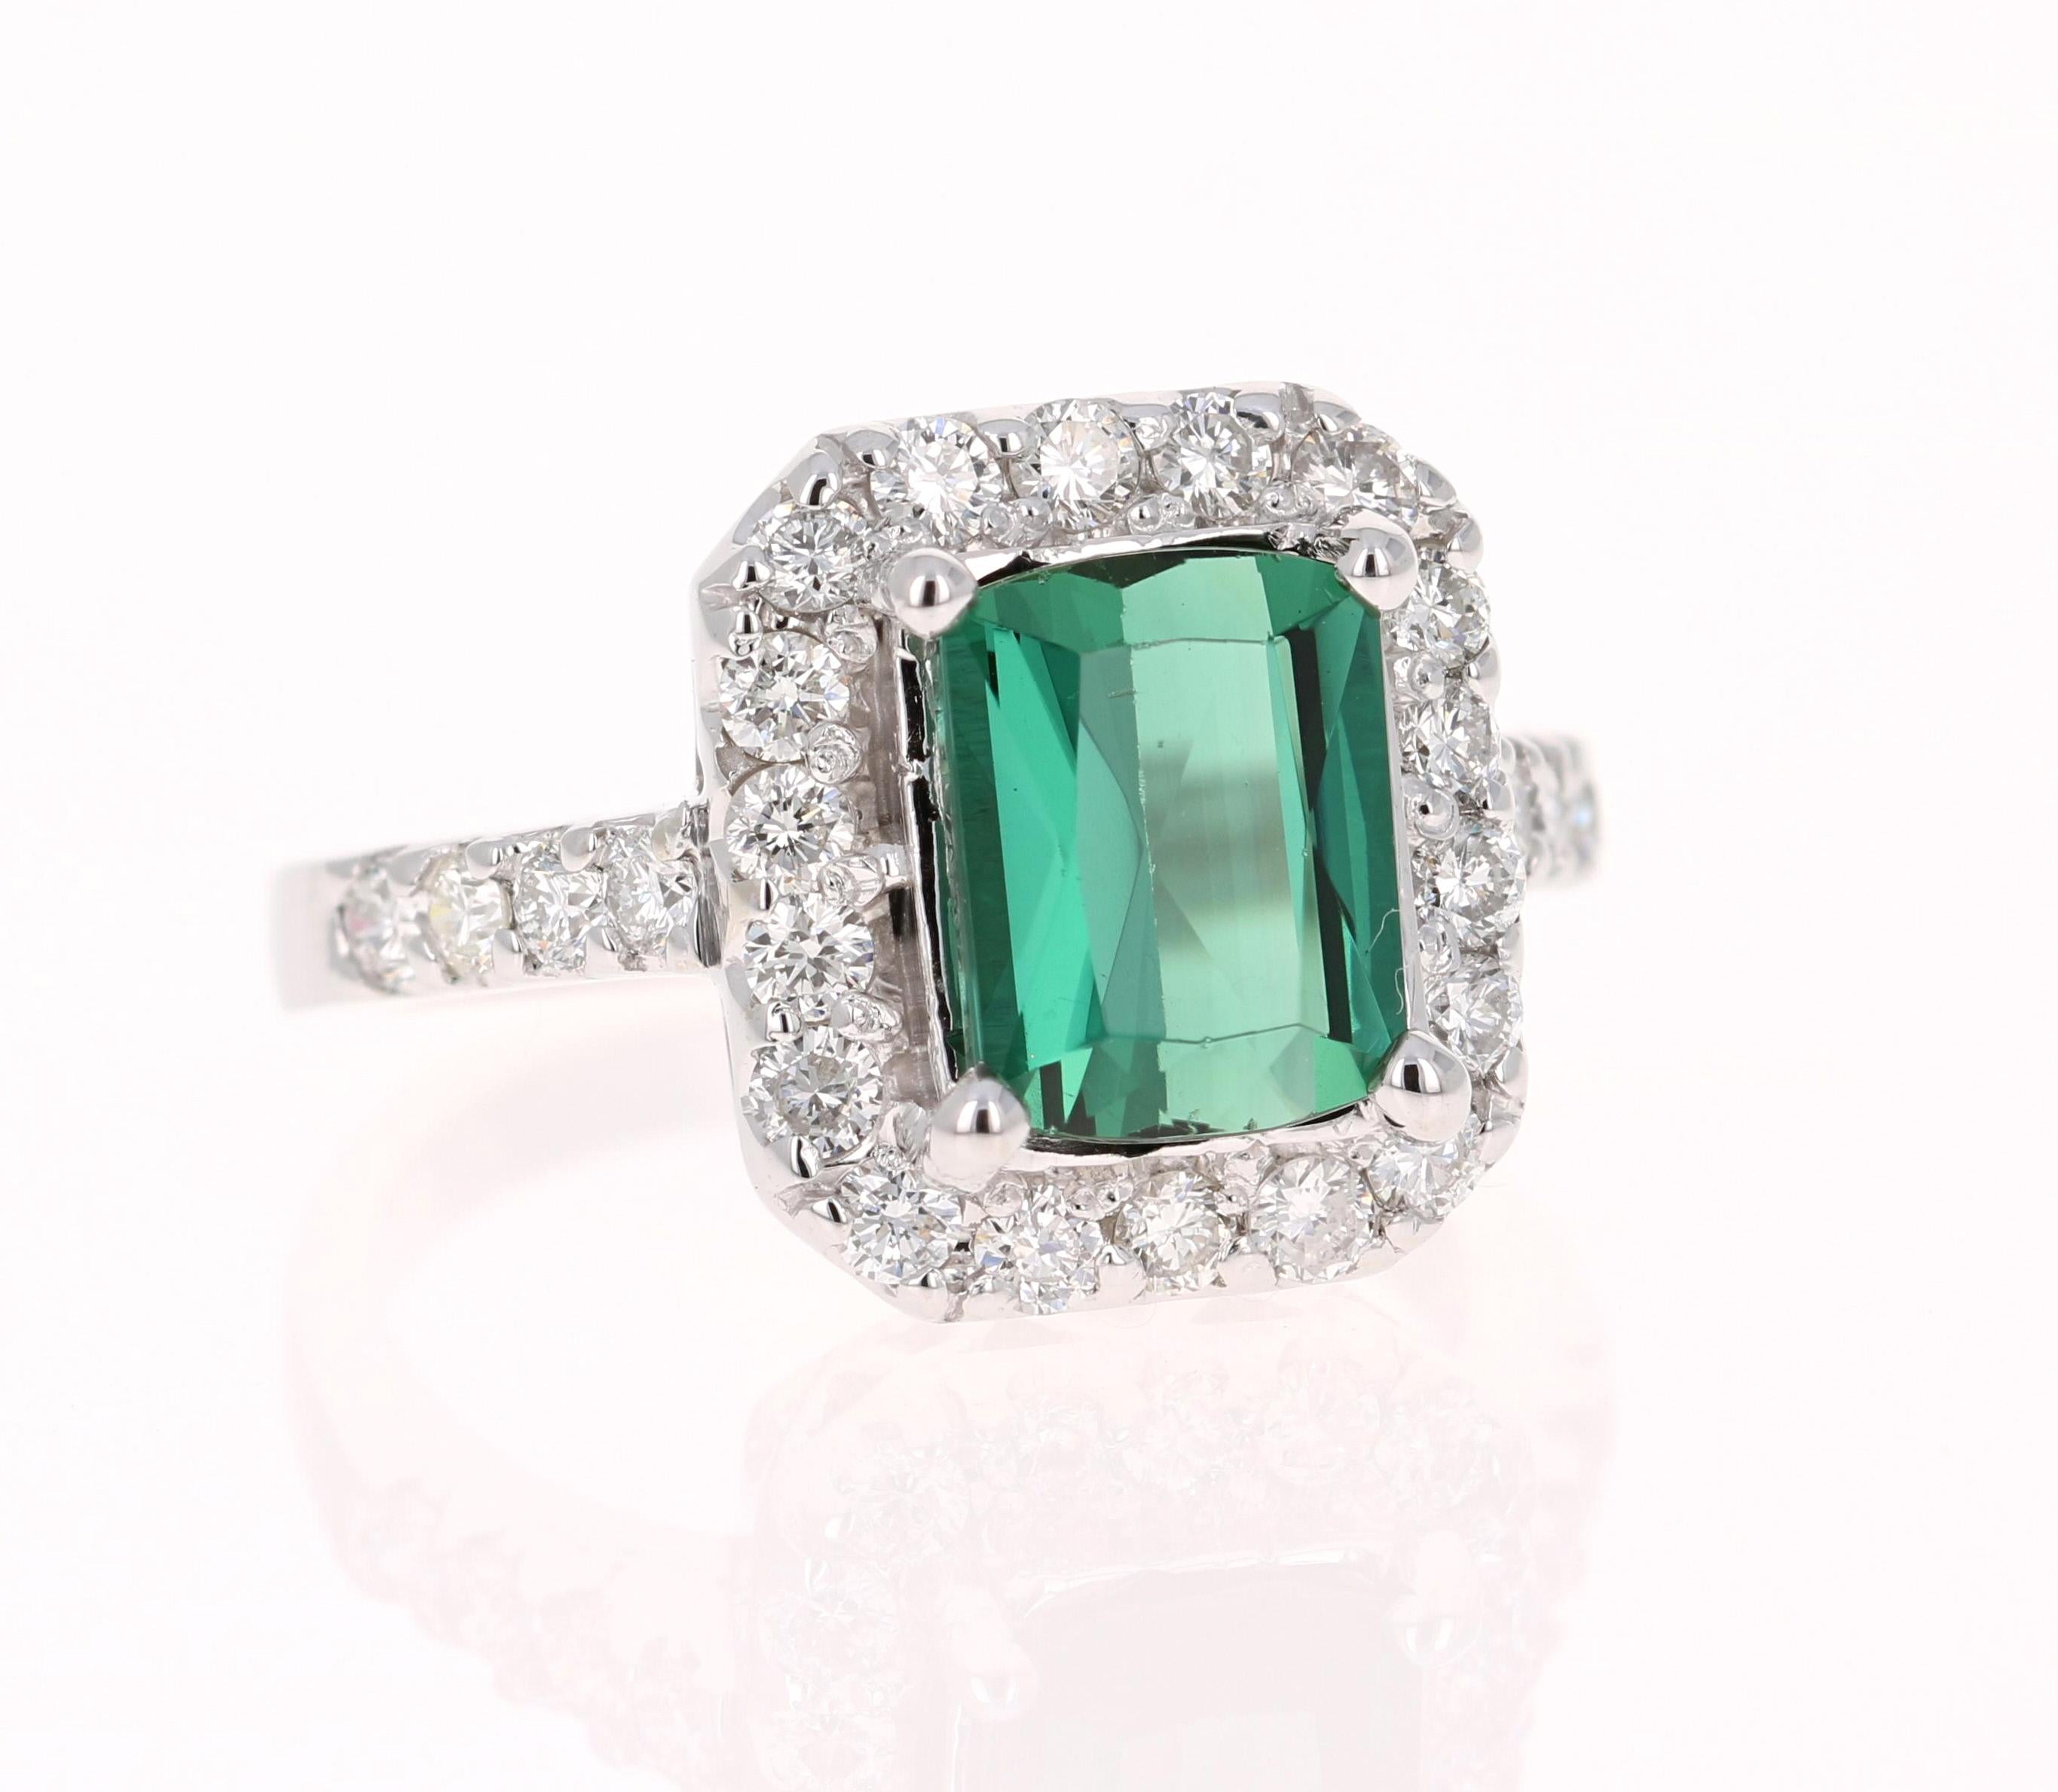 This ring has a magnificently beautiful Emerald Cut Green Tourmaline that weighs 2.45 Carats and has 26 Round Cut Diamonds weighing 0.89 Carats. (Clarity: VS, Color: F) The total carat weight of the ring is 3.34 Carats.

The green tourmaline is